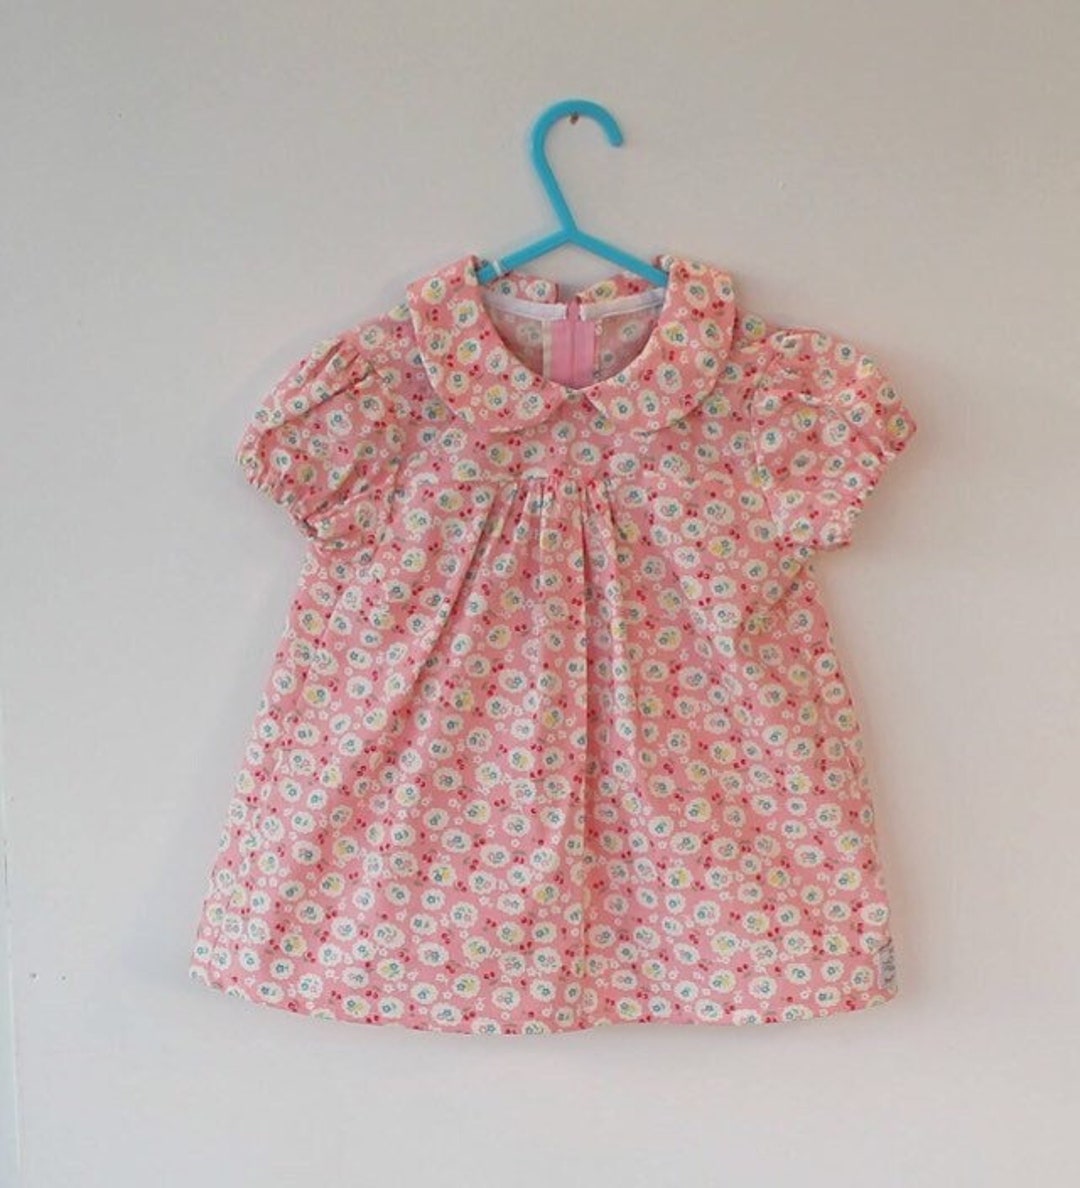 Pretty Summer Dress With Matching Underwear for a t1one Year - Etsy